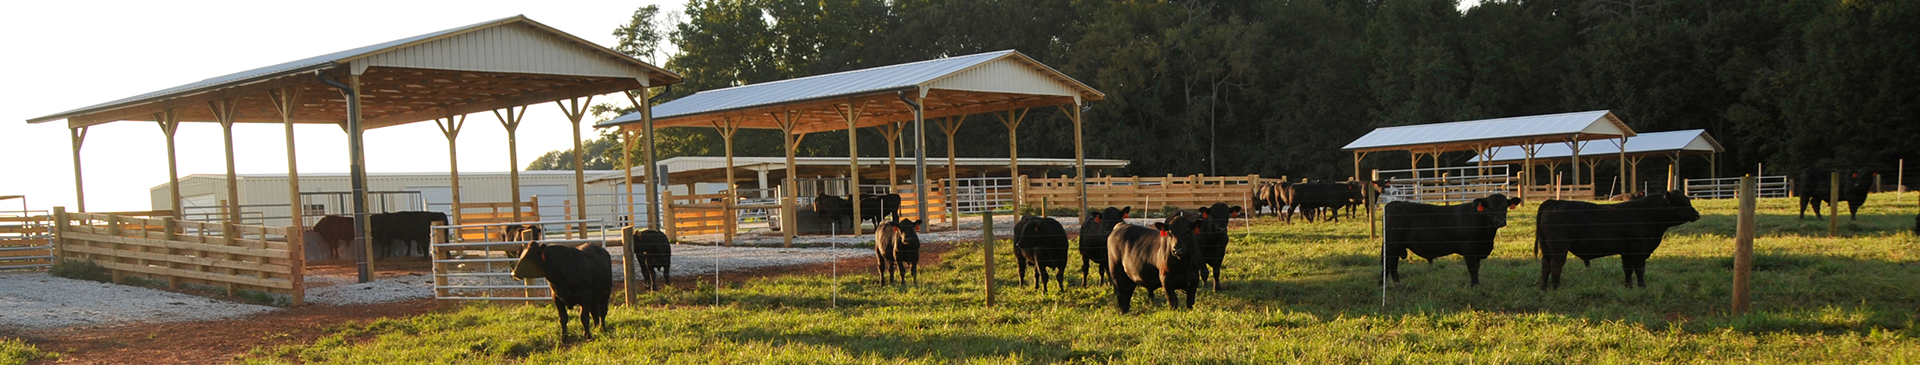 cow feeder in a pasture under shelted awnings and cows nearby